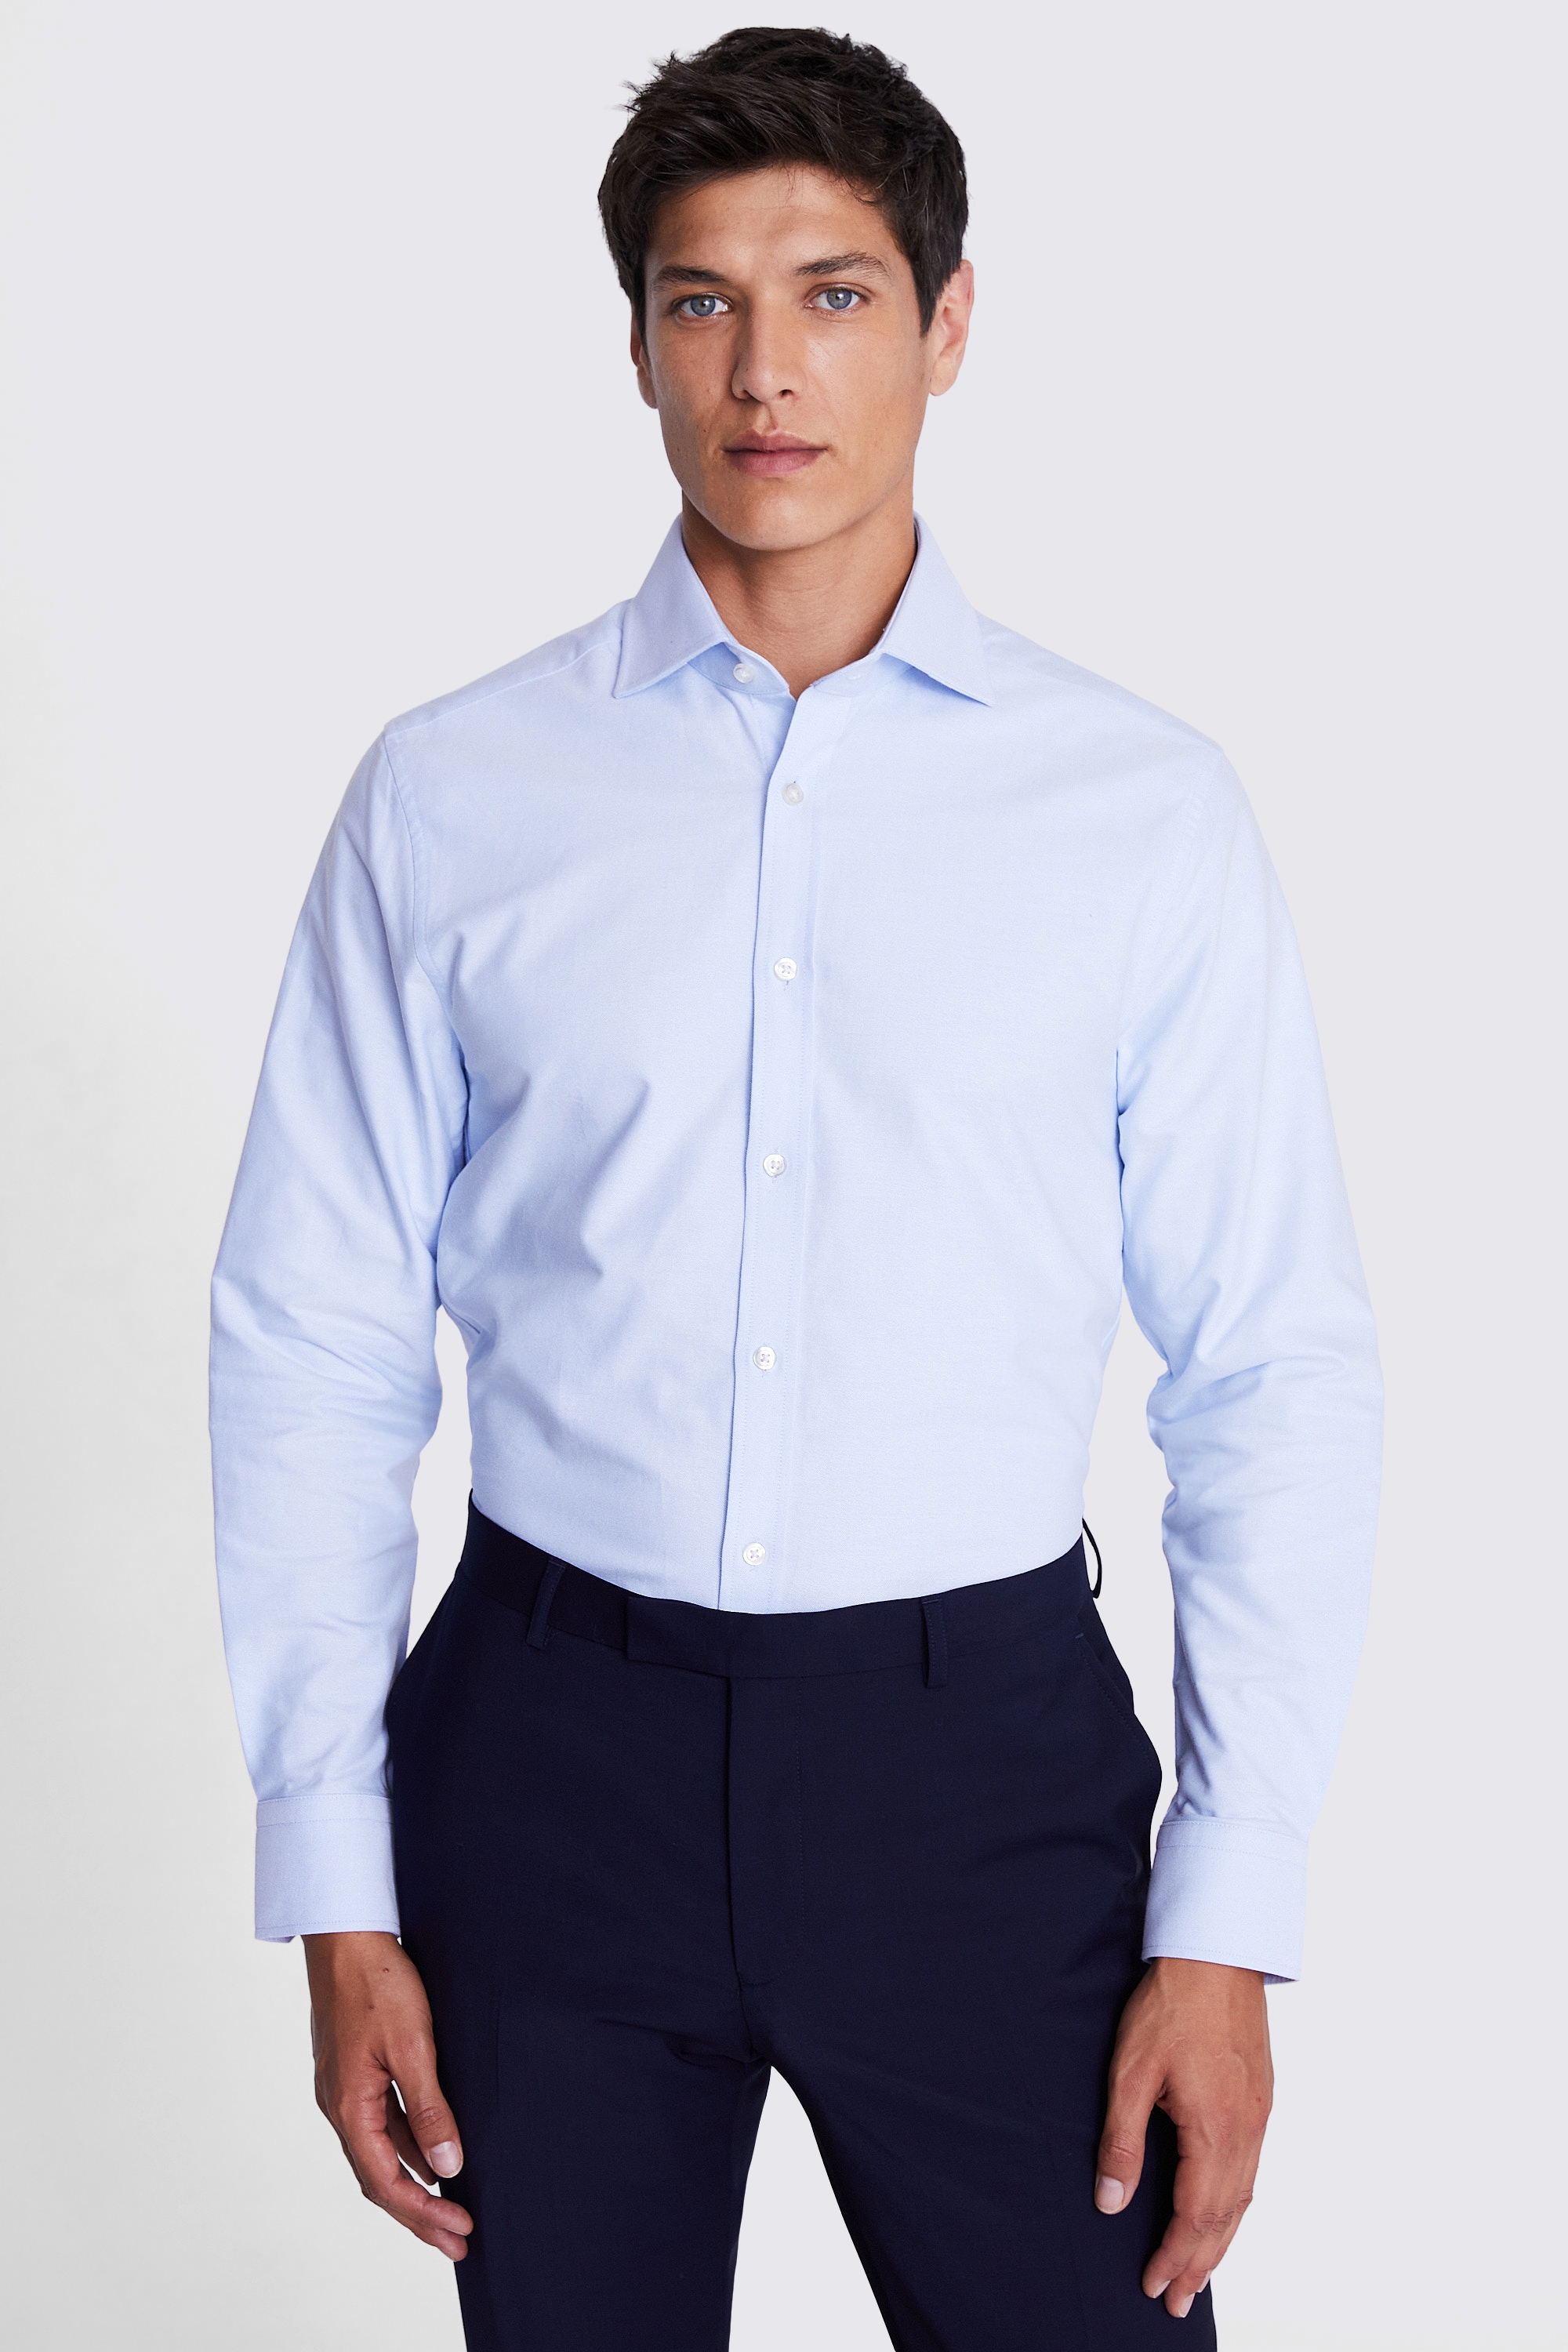 Tailored Fit Sky Oxford Shirt | Buy Online at Moss